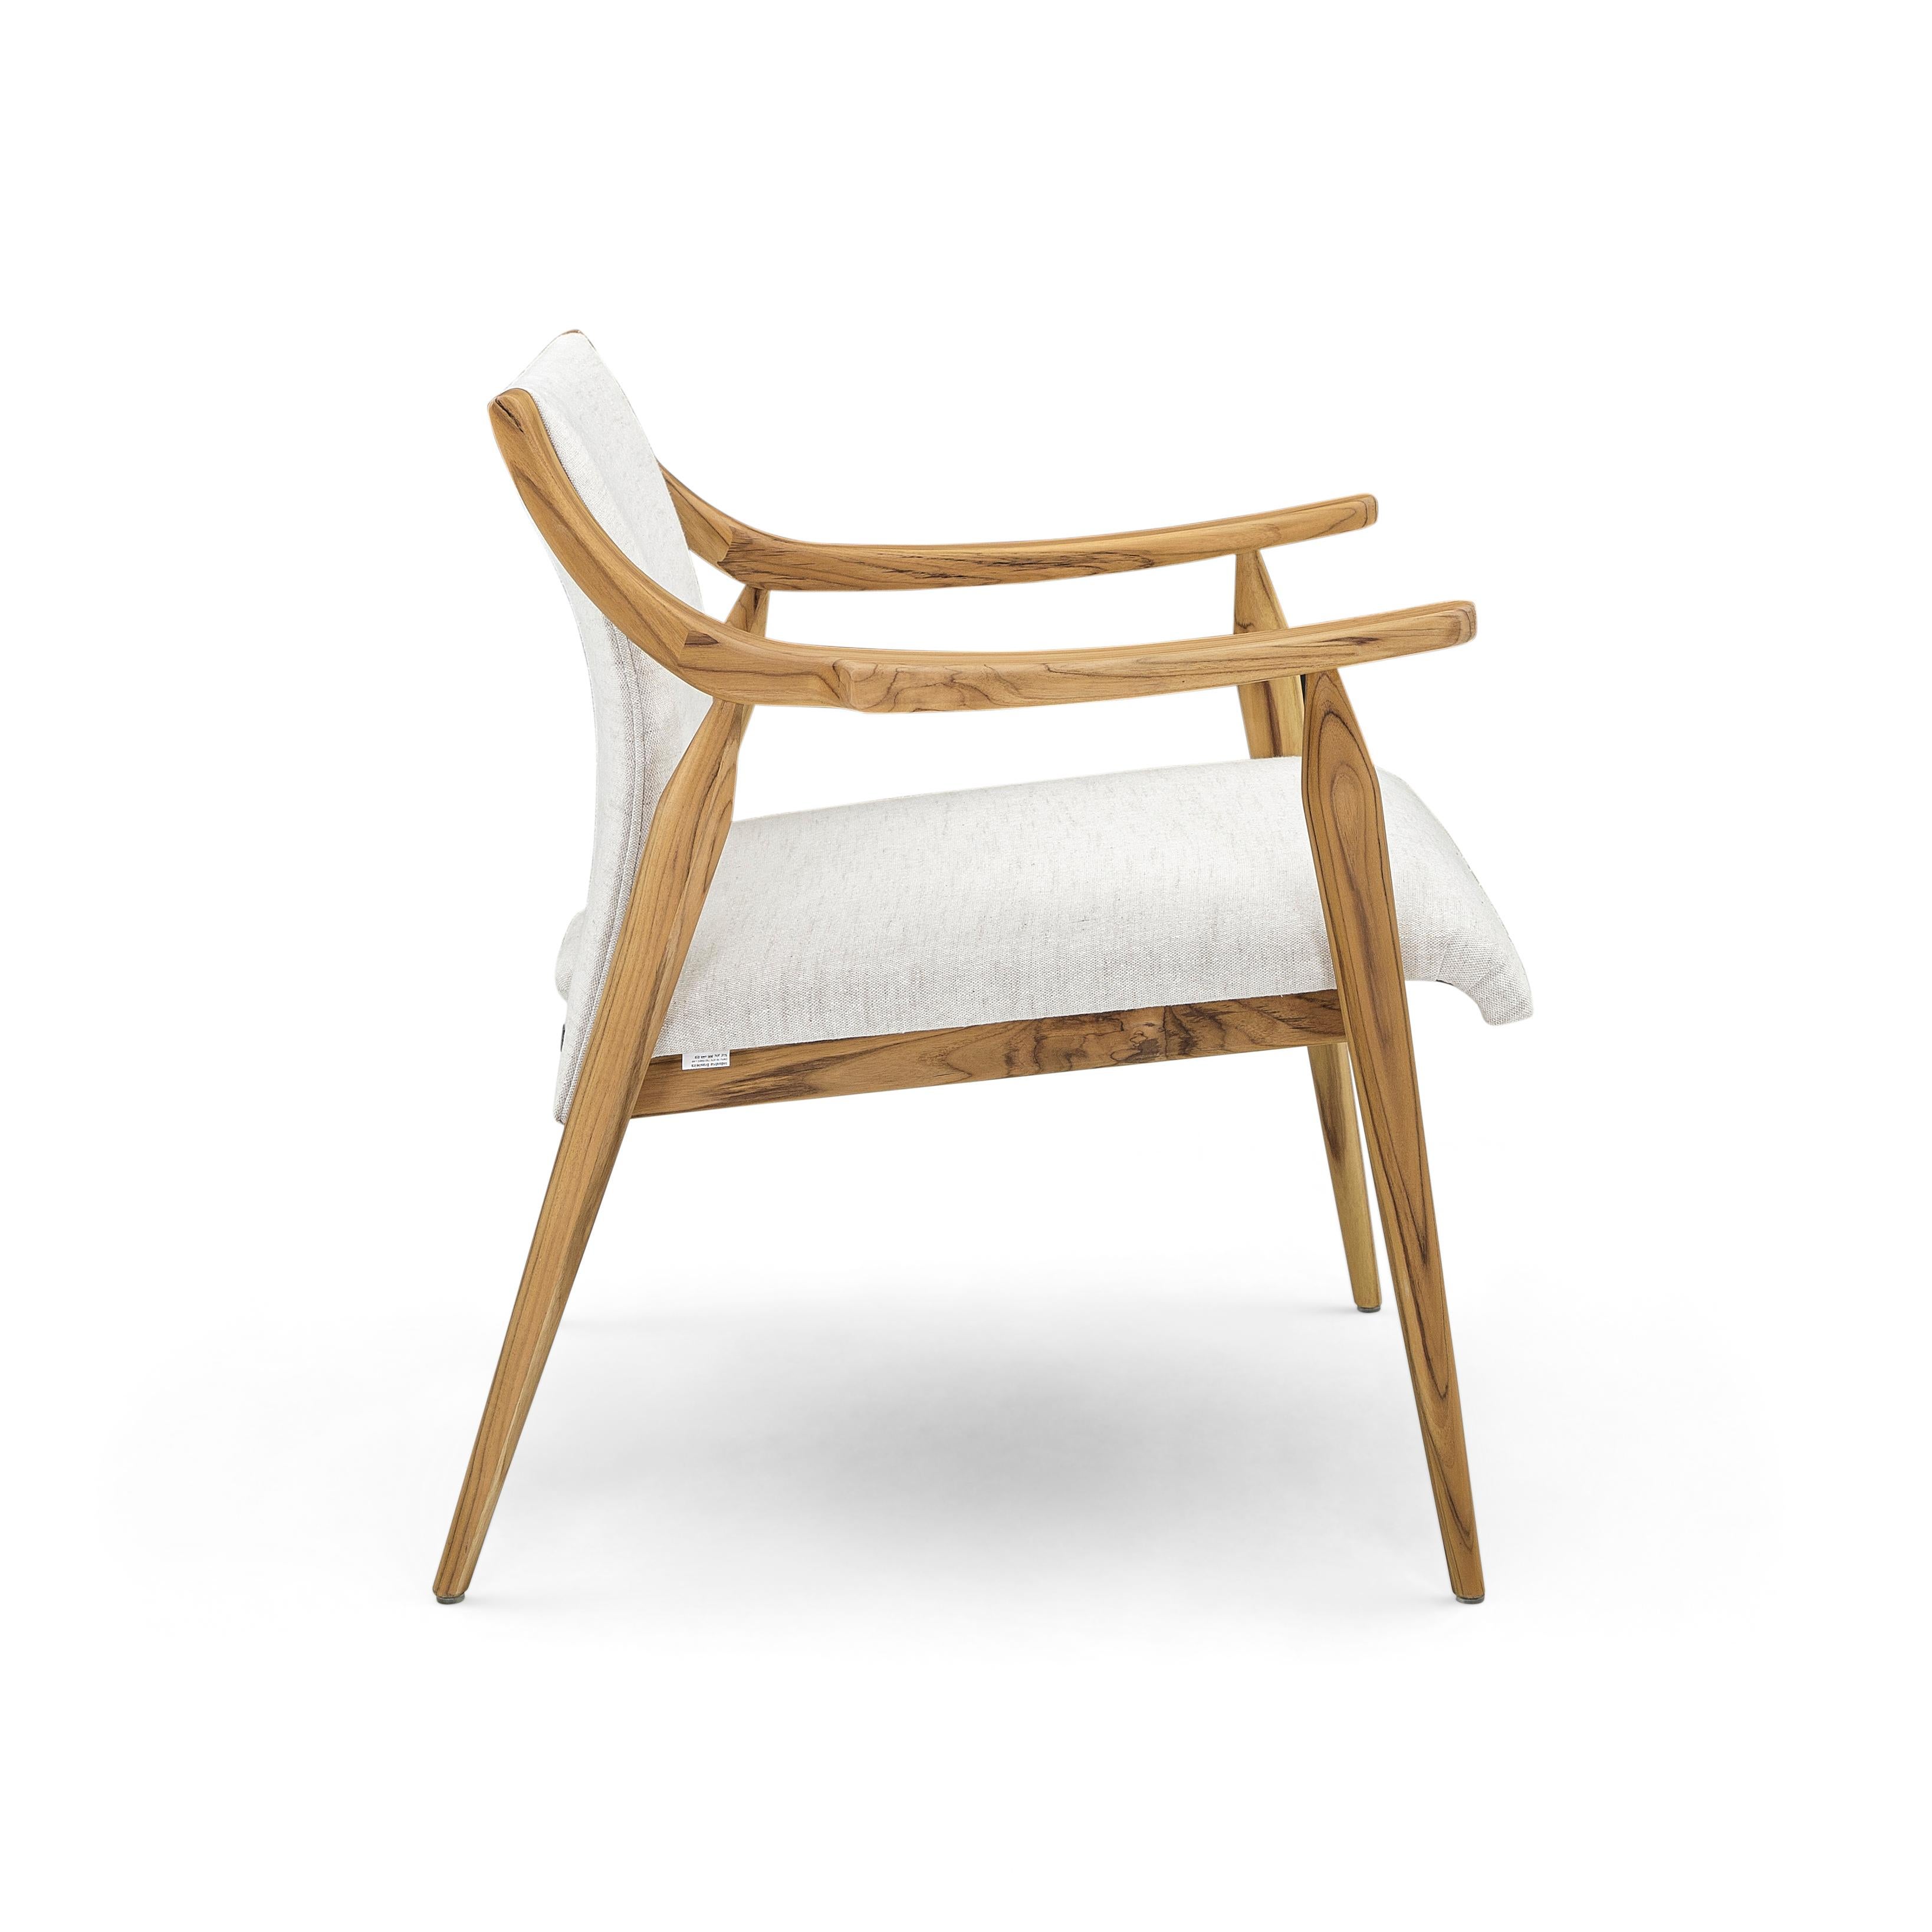 Brazilian Mince Armchair Featuring Curved Arms and Spindle Legs in Teak Wood Finish For Sale